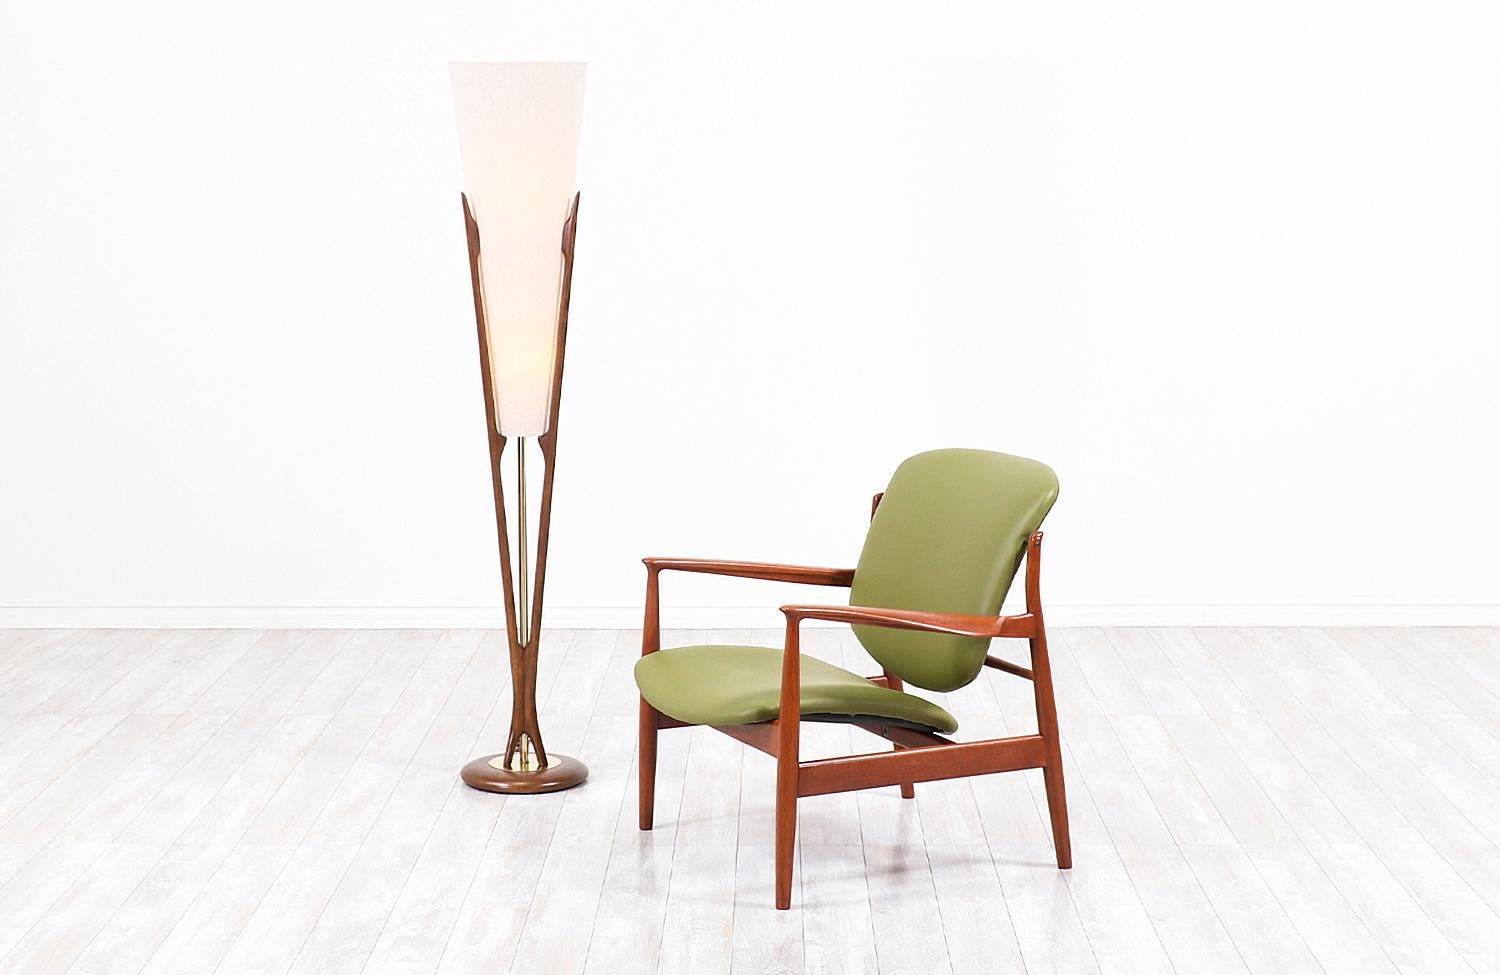 Stunning sculpted modern floor lamp designed and manufactured by Modeline of California in the United States, circa 1960s. This rare floor lamp is comprised of a carved walnut wood frame that connects from the top to the rounded base creating a ‘V’